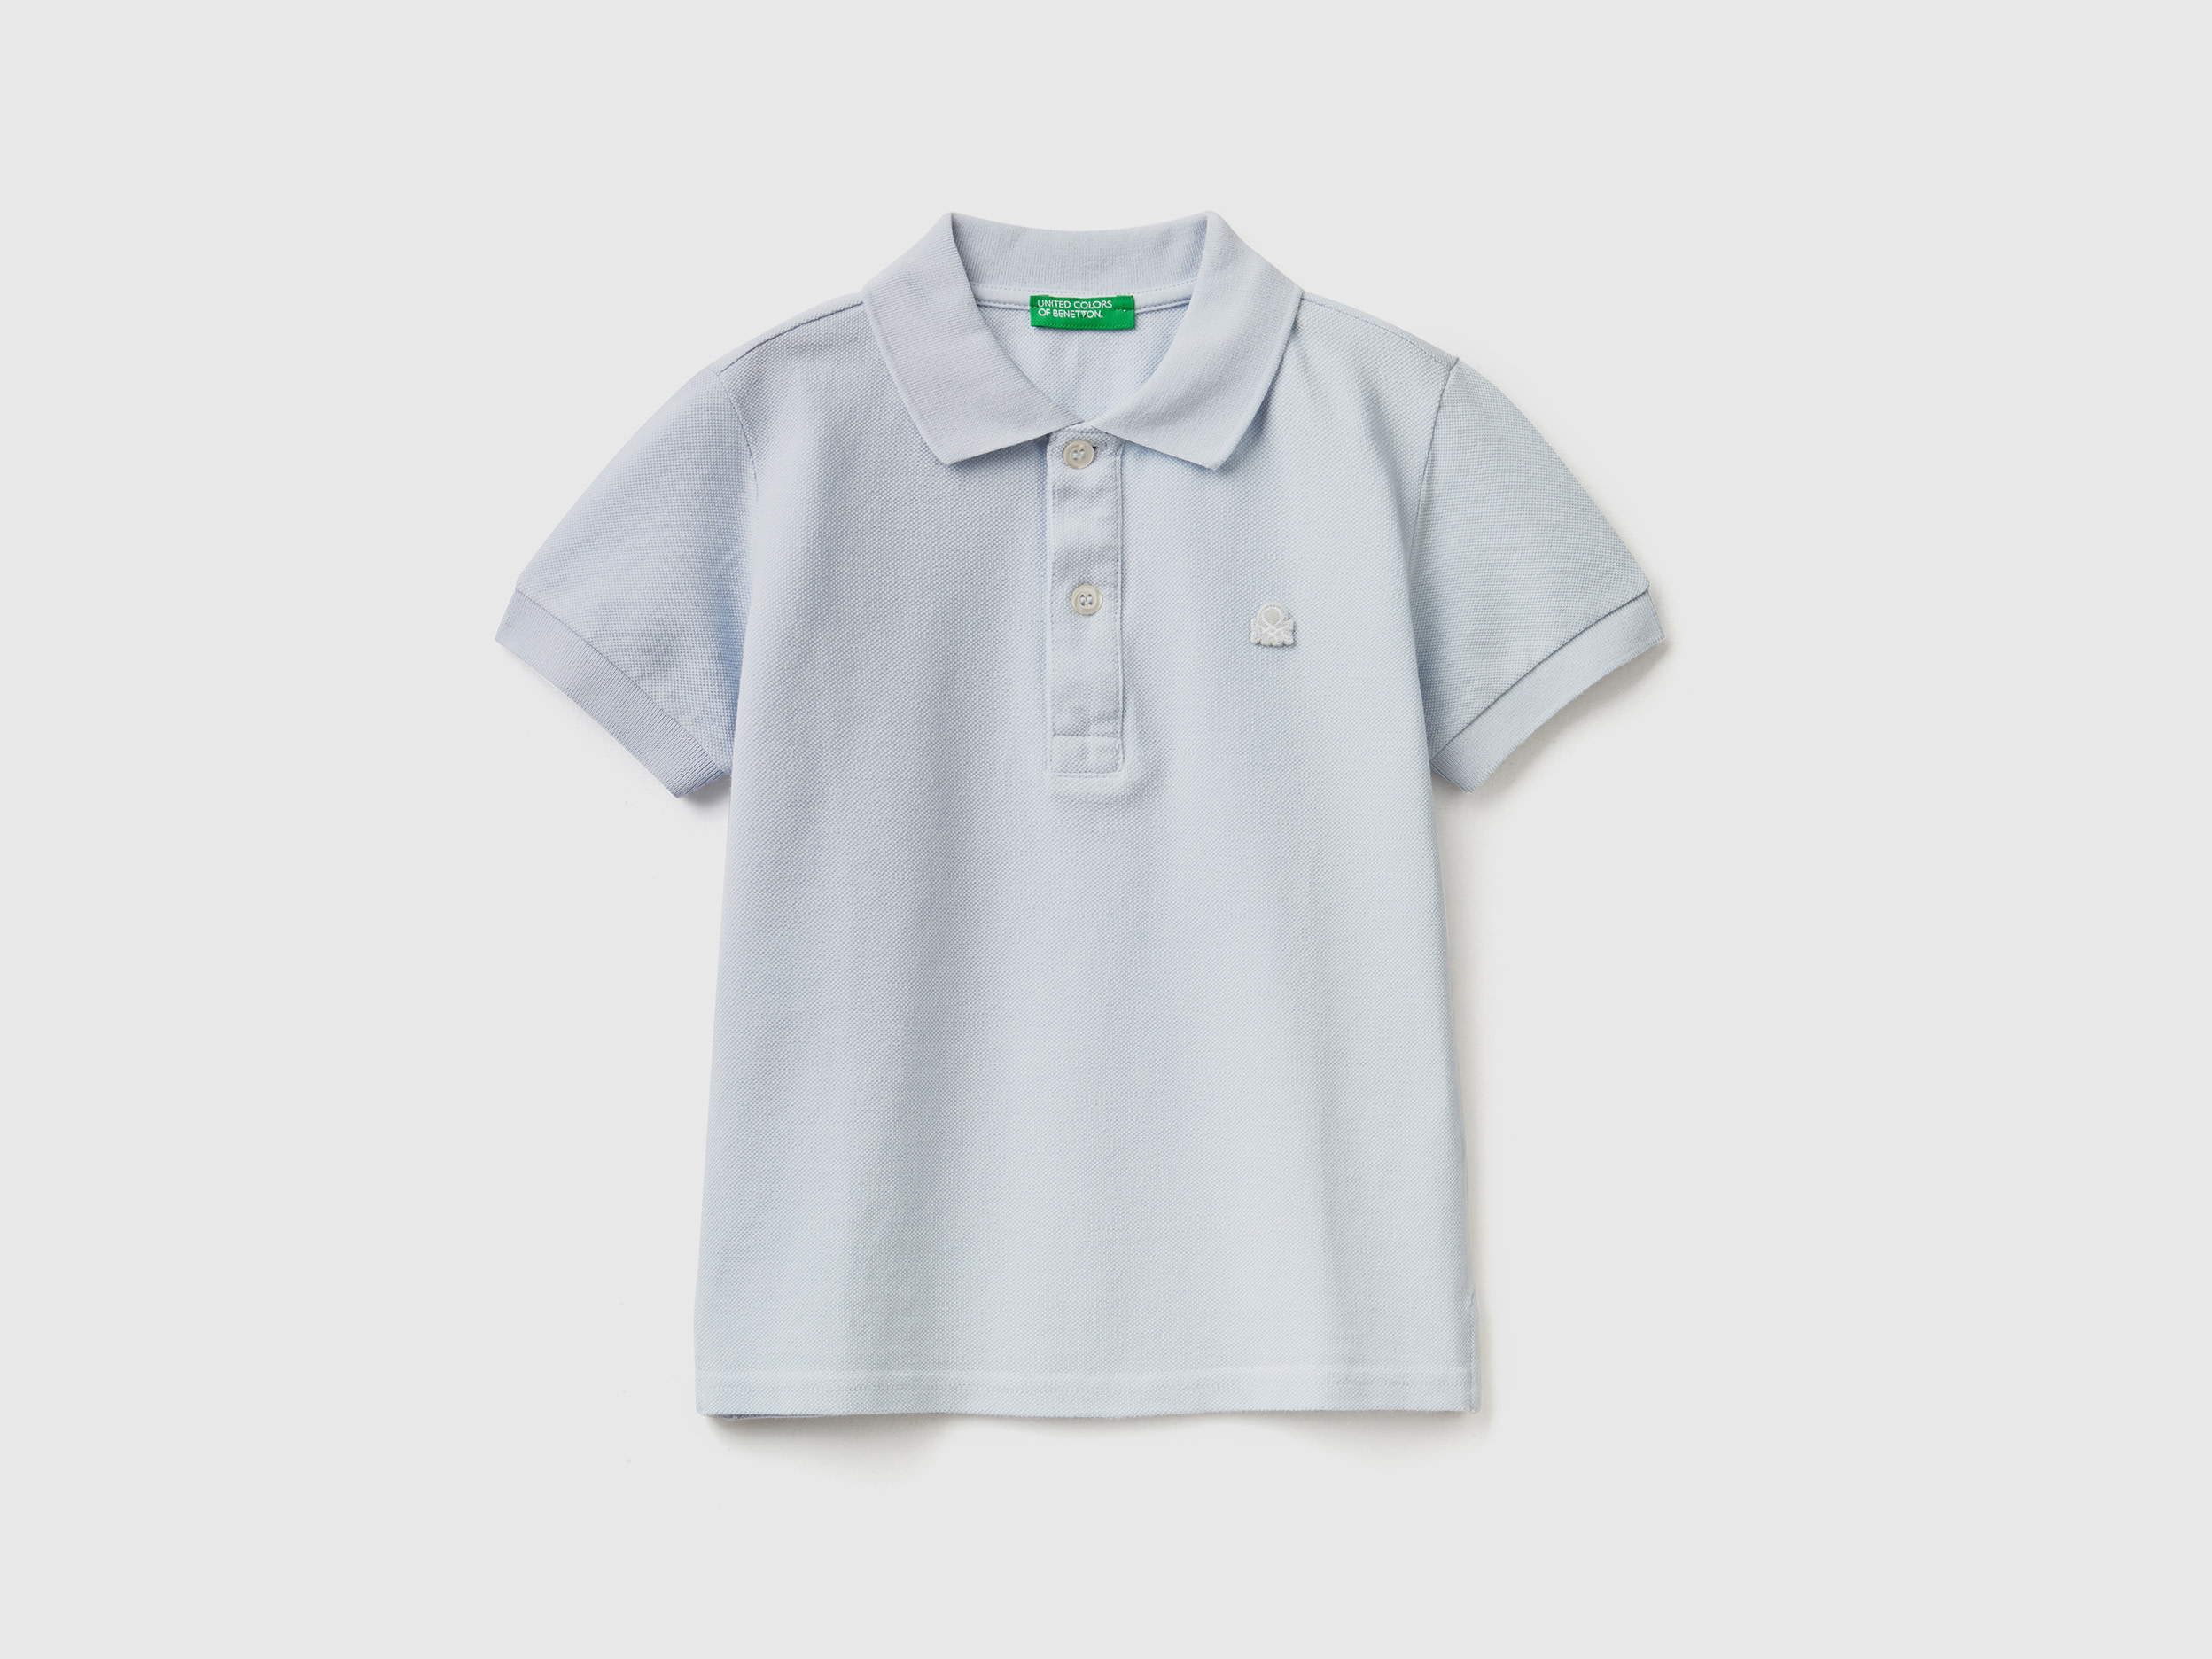 Image of Benetton, Short Sleeve Polo In Organic Cotton, size 82, Sky Blue, Kids